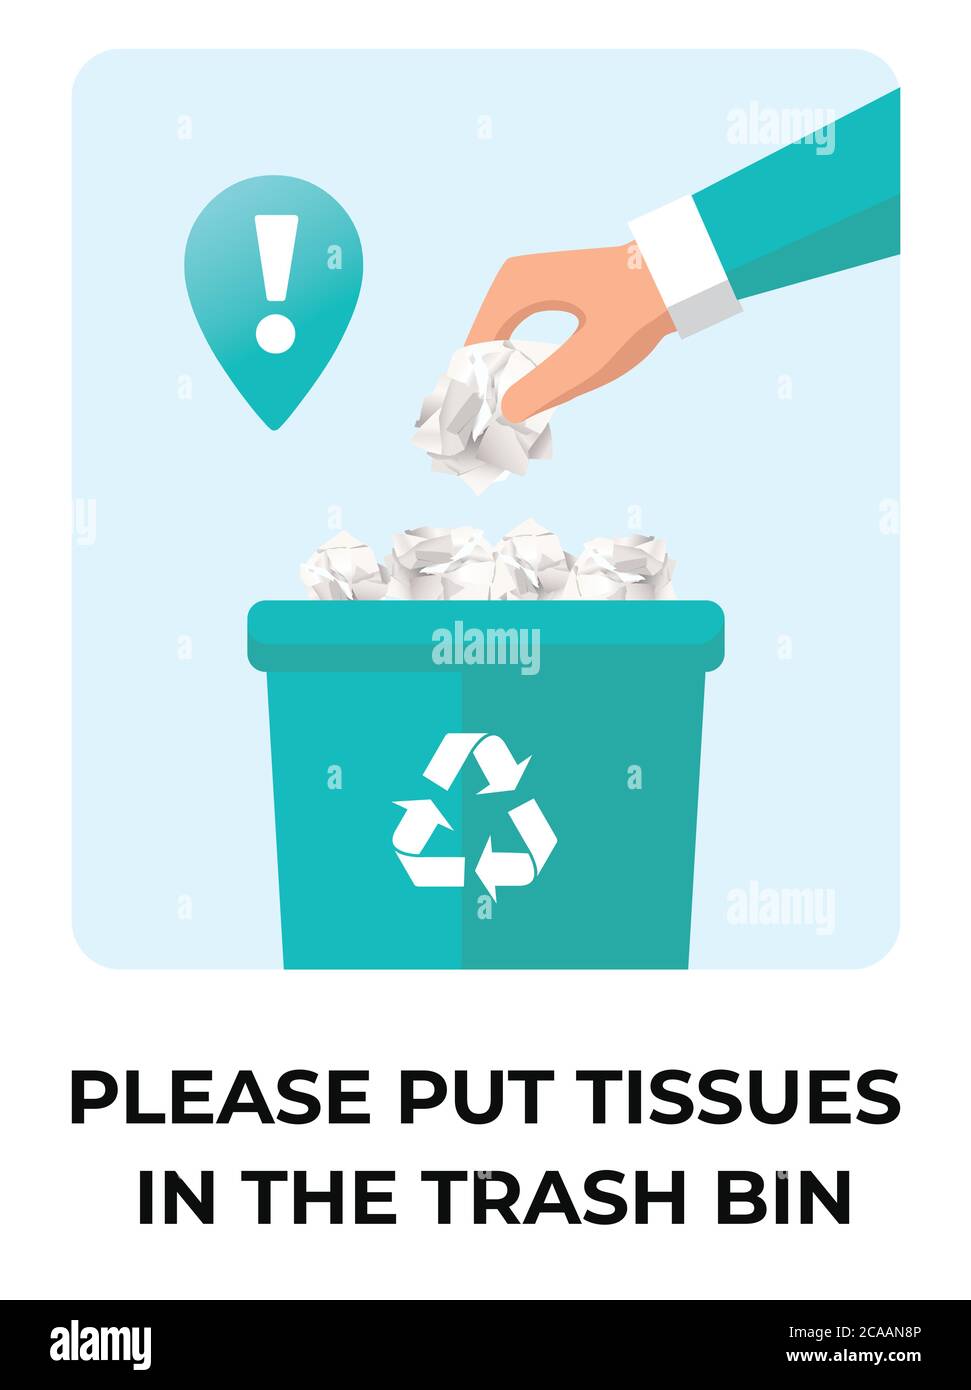 Put tissues in the trash bin sign. Facial Tissues In Garbage Bin. Tissues and Trash Box. new dustbin rule. hand throwing tissue. keep clean Stock Vector